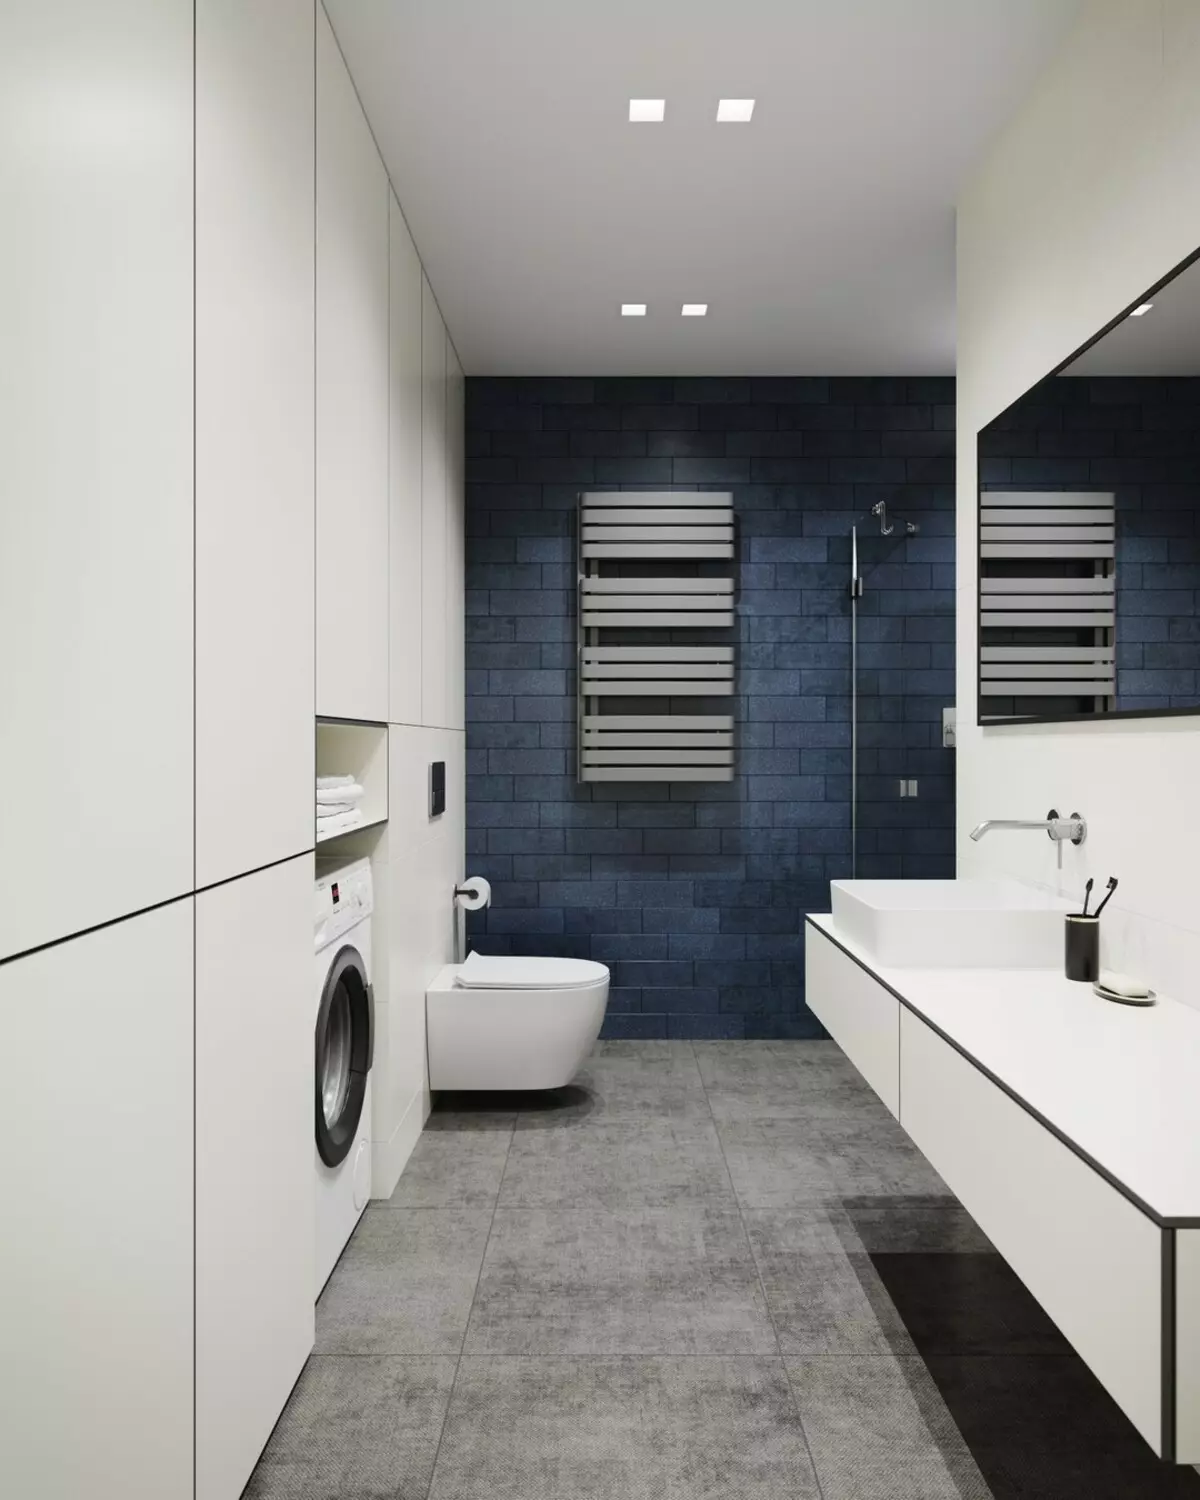 Bathroom design with a washing machine: We carry out the technique and make the space functional 4843_85